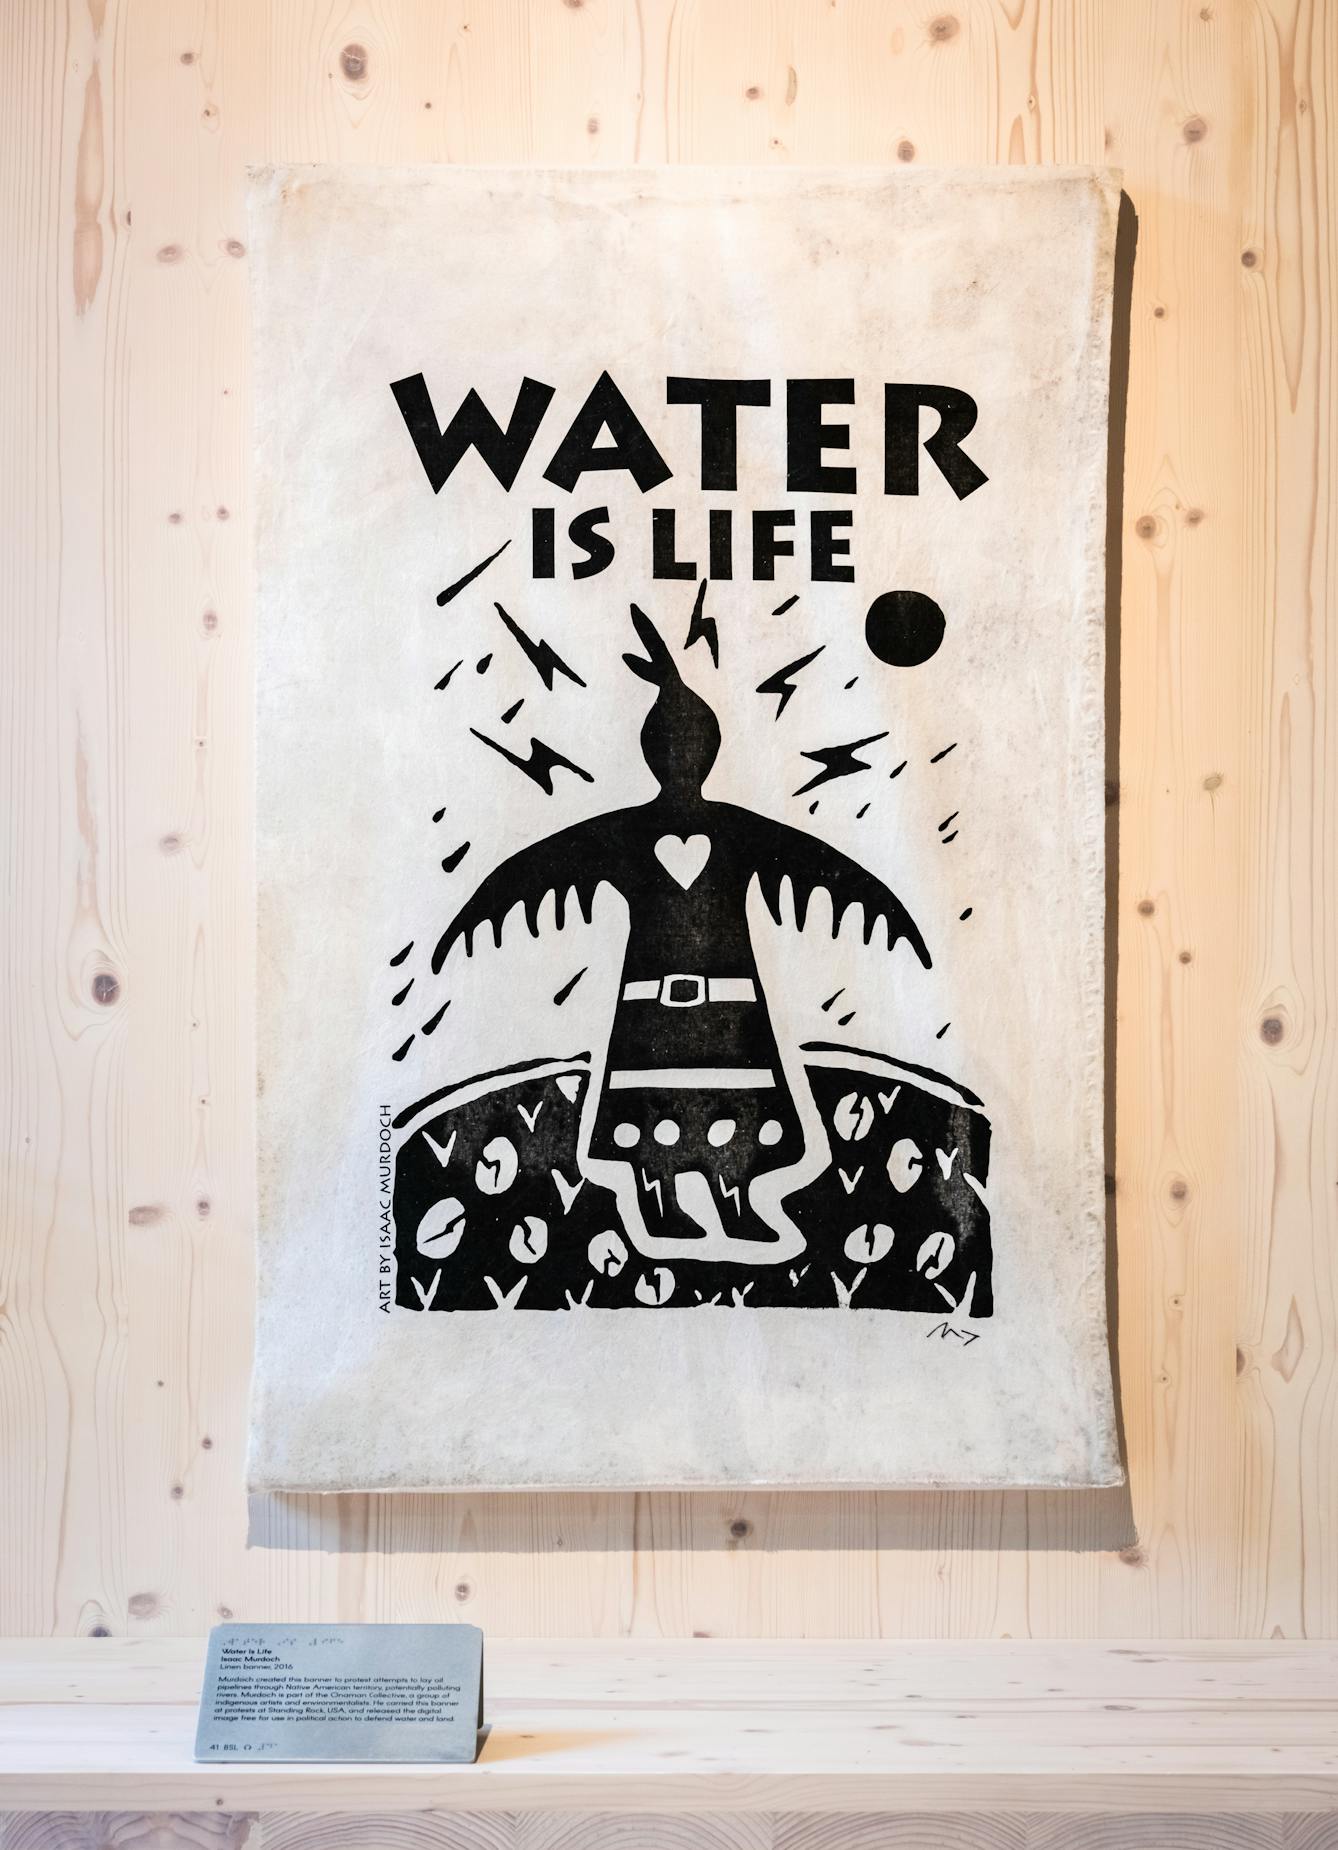 Photograph of a artwork banner hung in a gallery setting on a stained wood wall. On the banner is written the words 'water is life'. Below the words is an illustrated human figure in black and white, set in the context of land, sky and weather.